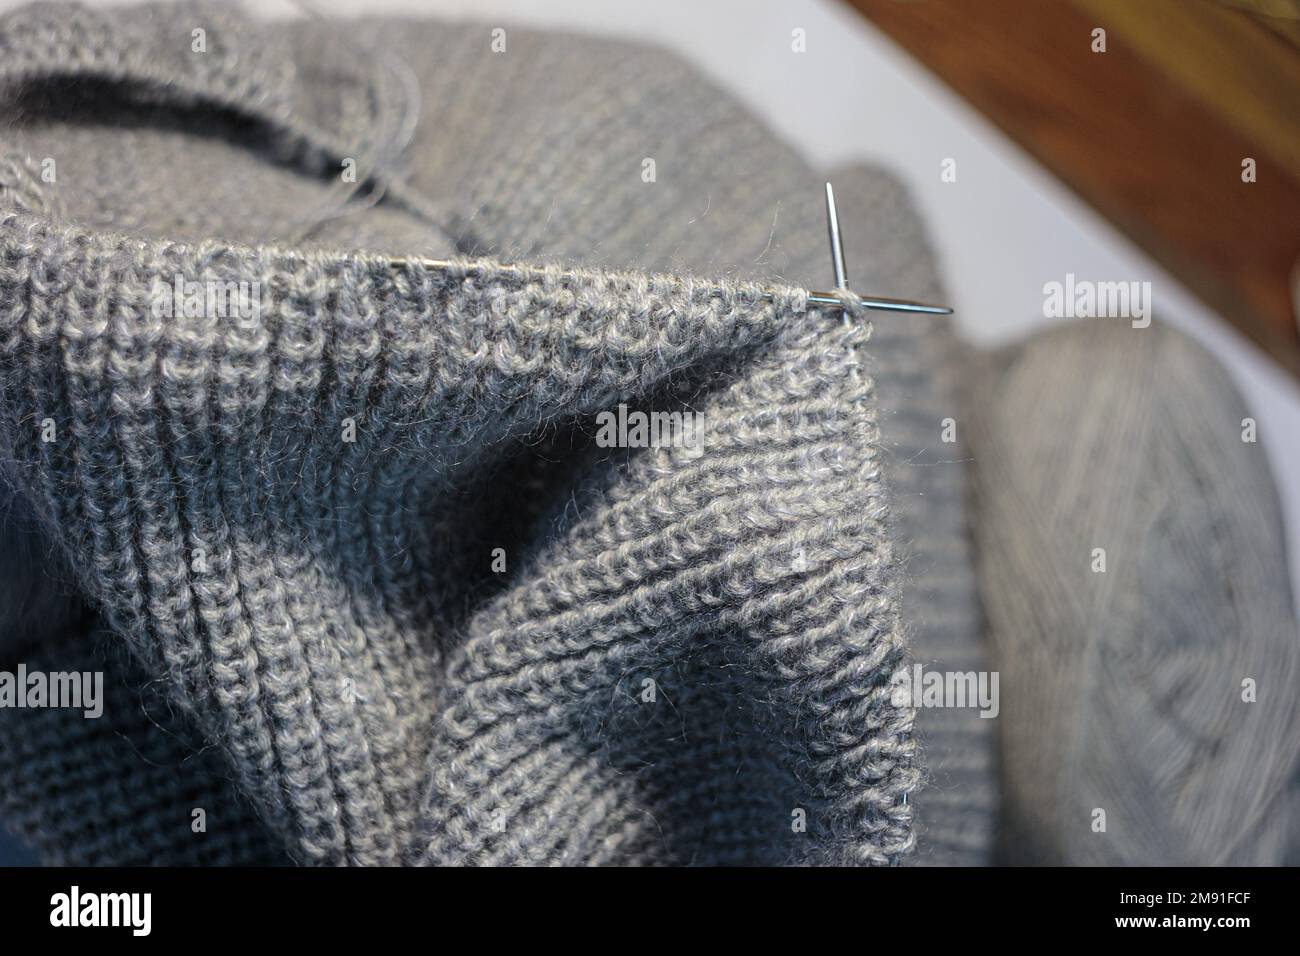 Knitting the clothes using circular needles. On grey blurred background. Top view Stock Photo